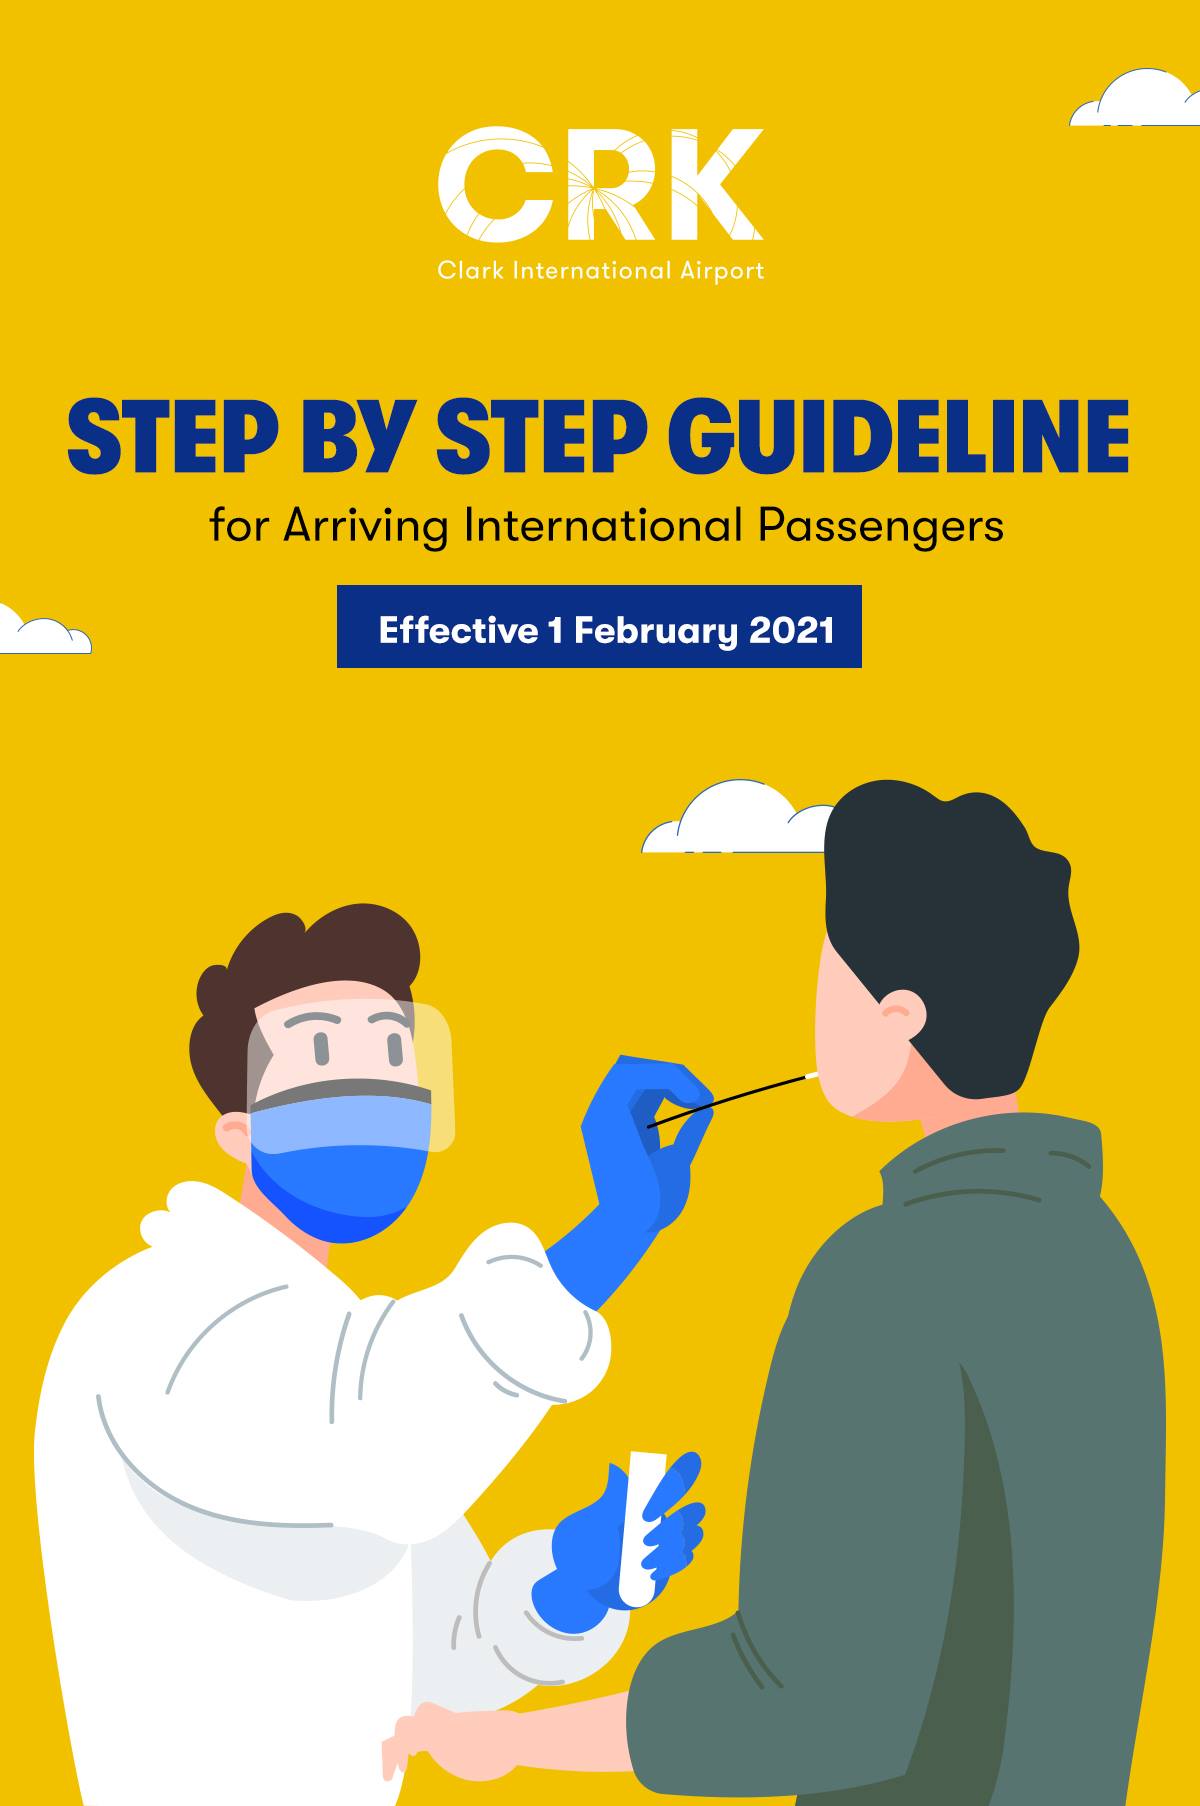 CLARK INTERNATIONAL AIRPORT (CRK): Step By Step Guide on International Arrival Procedures [Updated February 2021]